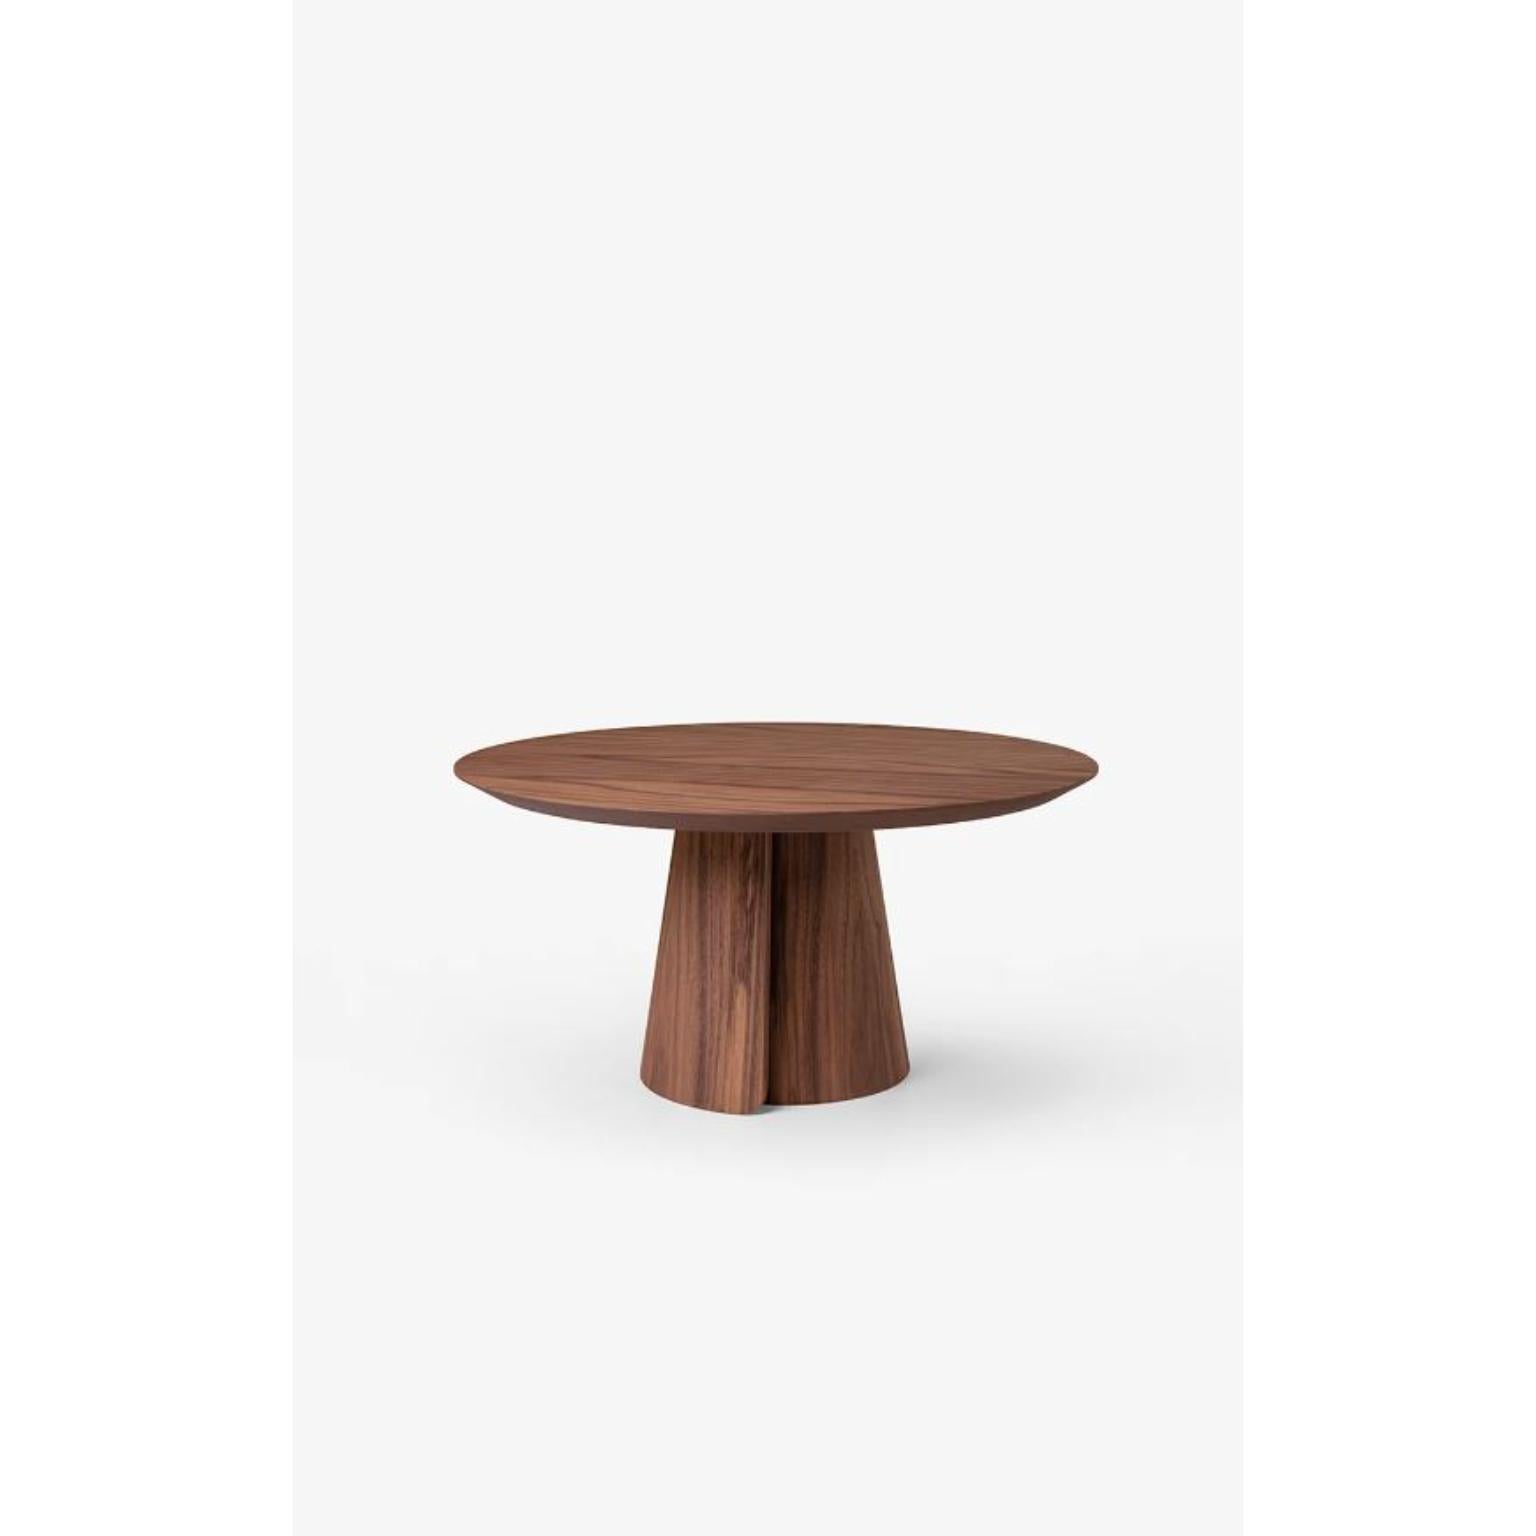 Volta Coffee Table 90 by Wentz
Dimensions: D 90 x W 90 x H 35 cm
Materials: Wood, Plywood, MDF, Veneer, Steel


The Volta table references nature in its impermanence. The detail on the base suggests natural movements and refers to nature's